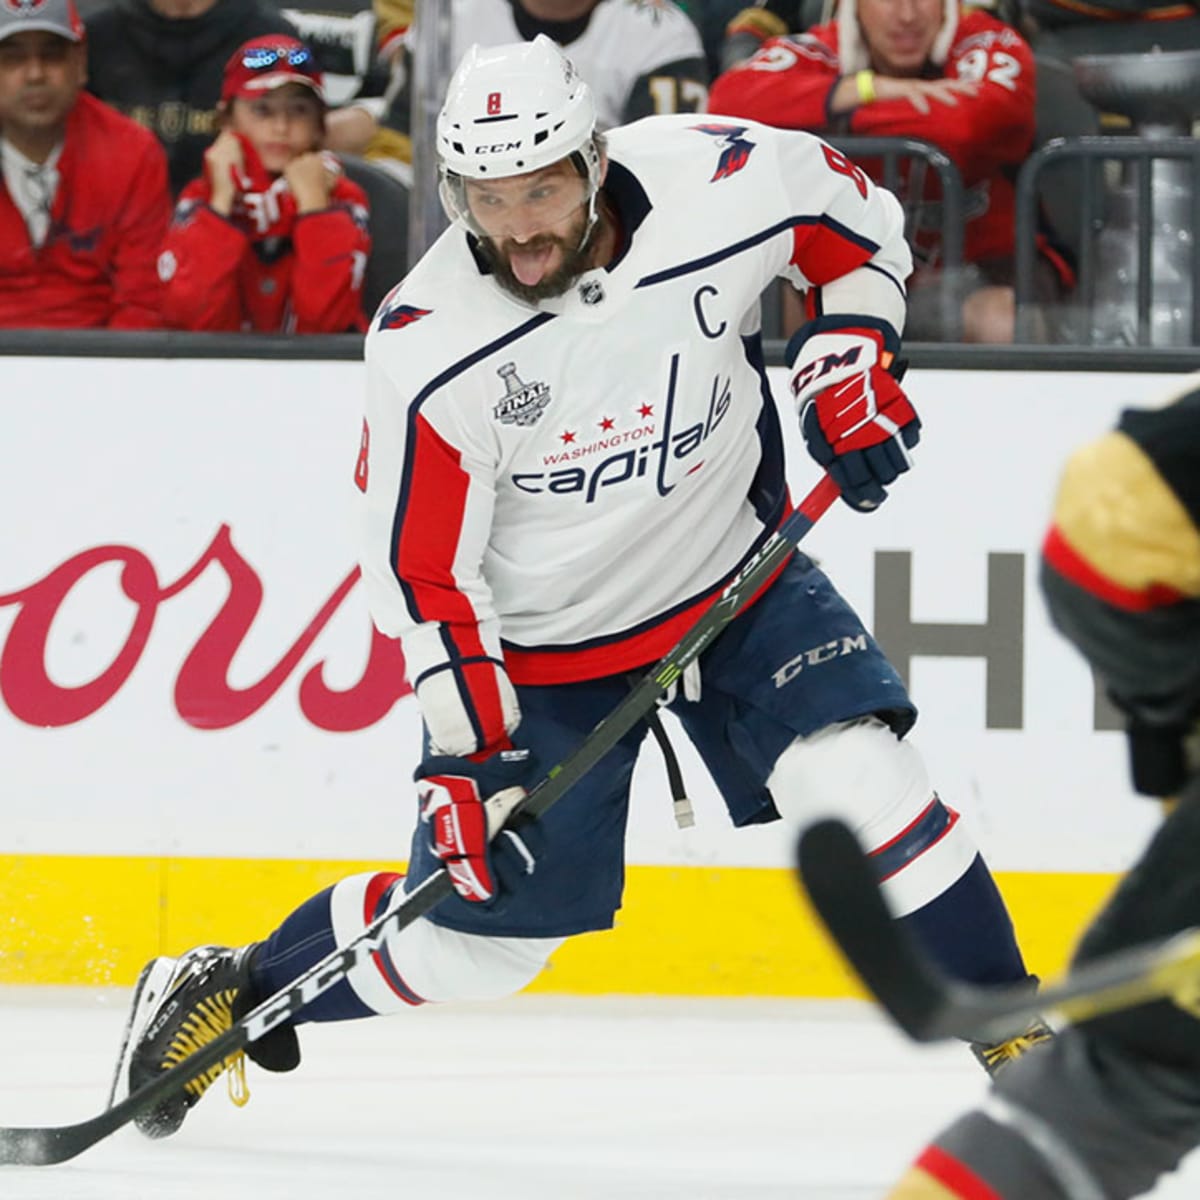 Alex Ovechkin Fanpage - May 20, 1975 Stanley Cup finals between the  Philadelphia Flyers and the Buffalo Sabres was the third game of the series  known as the legendary Fog Game. Due